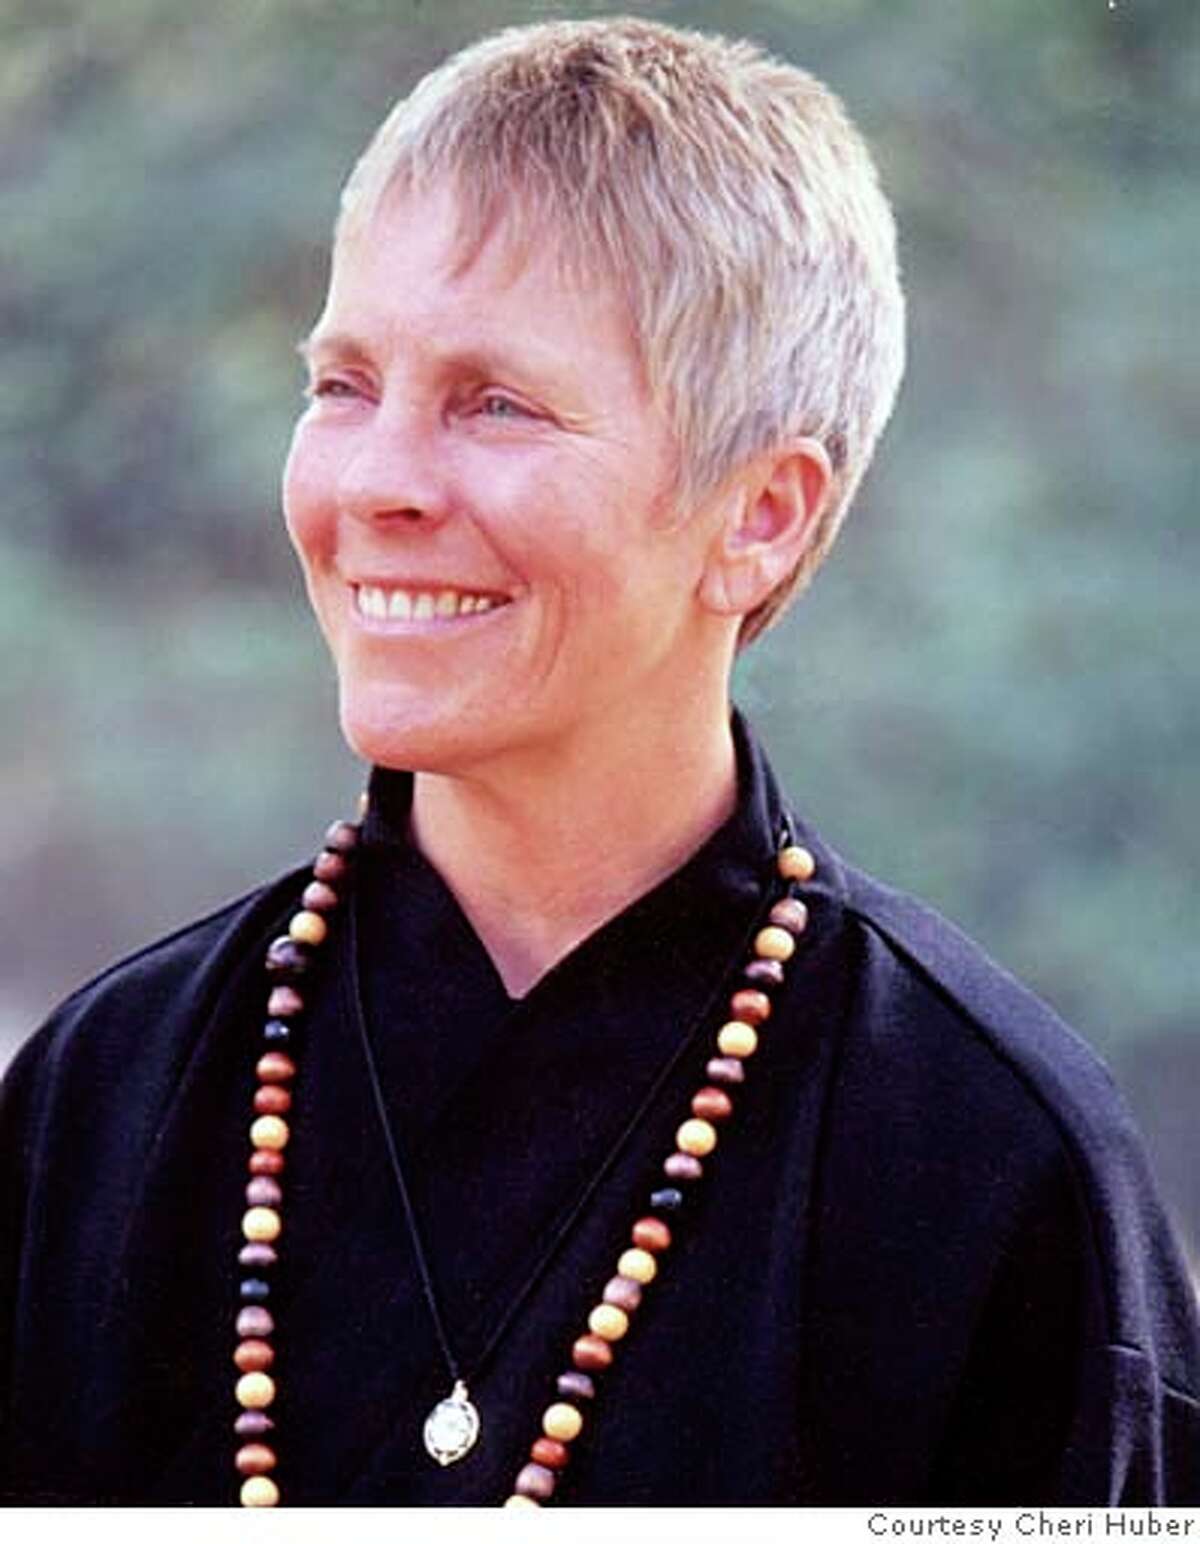 Cheri Huber is a Buddhist teacher in the Soto Zen tradition. She founded the Palo Alto Zen Center and the Zen Monastery Peace Center in Murphys, Calif., and is the author of 17 books. Photo courtesy Cheri Huber